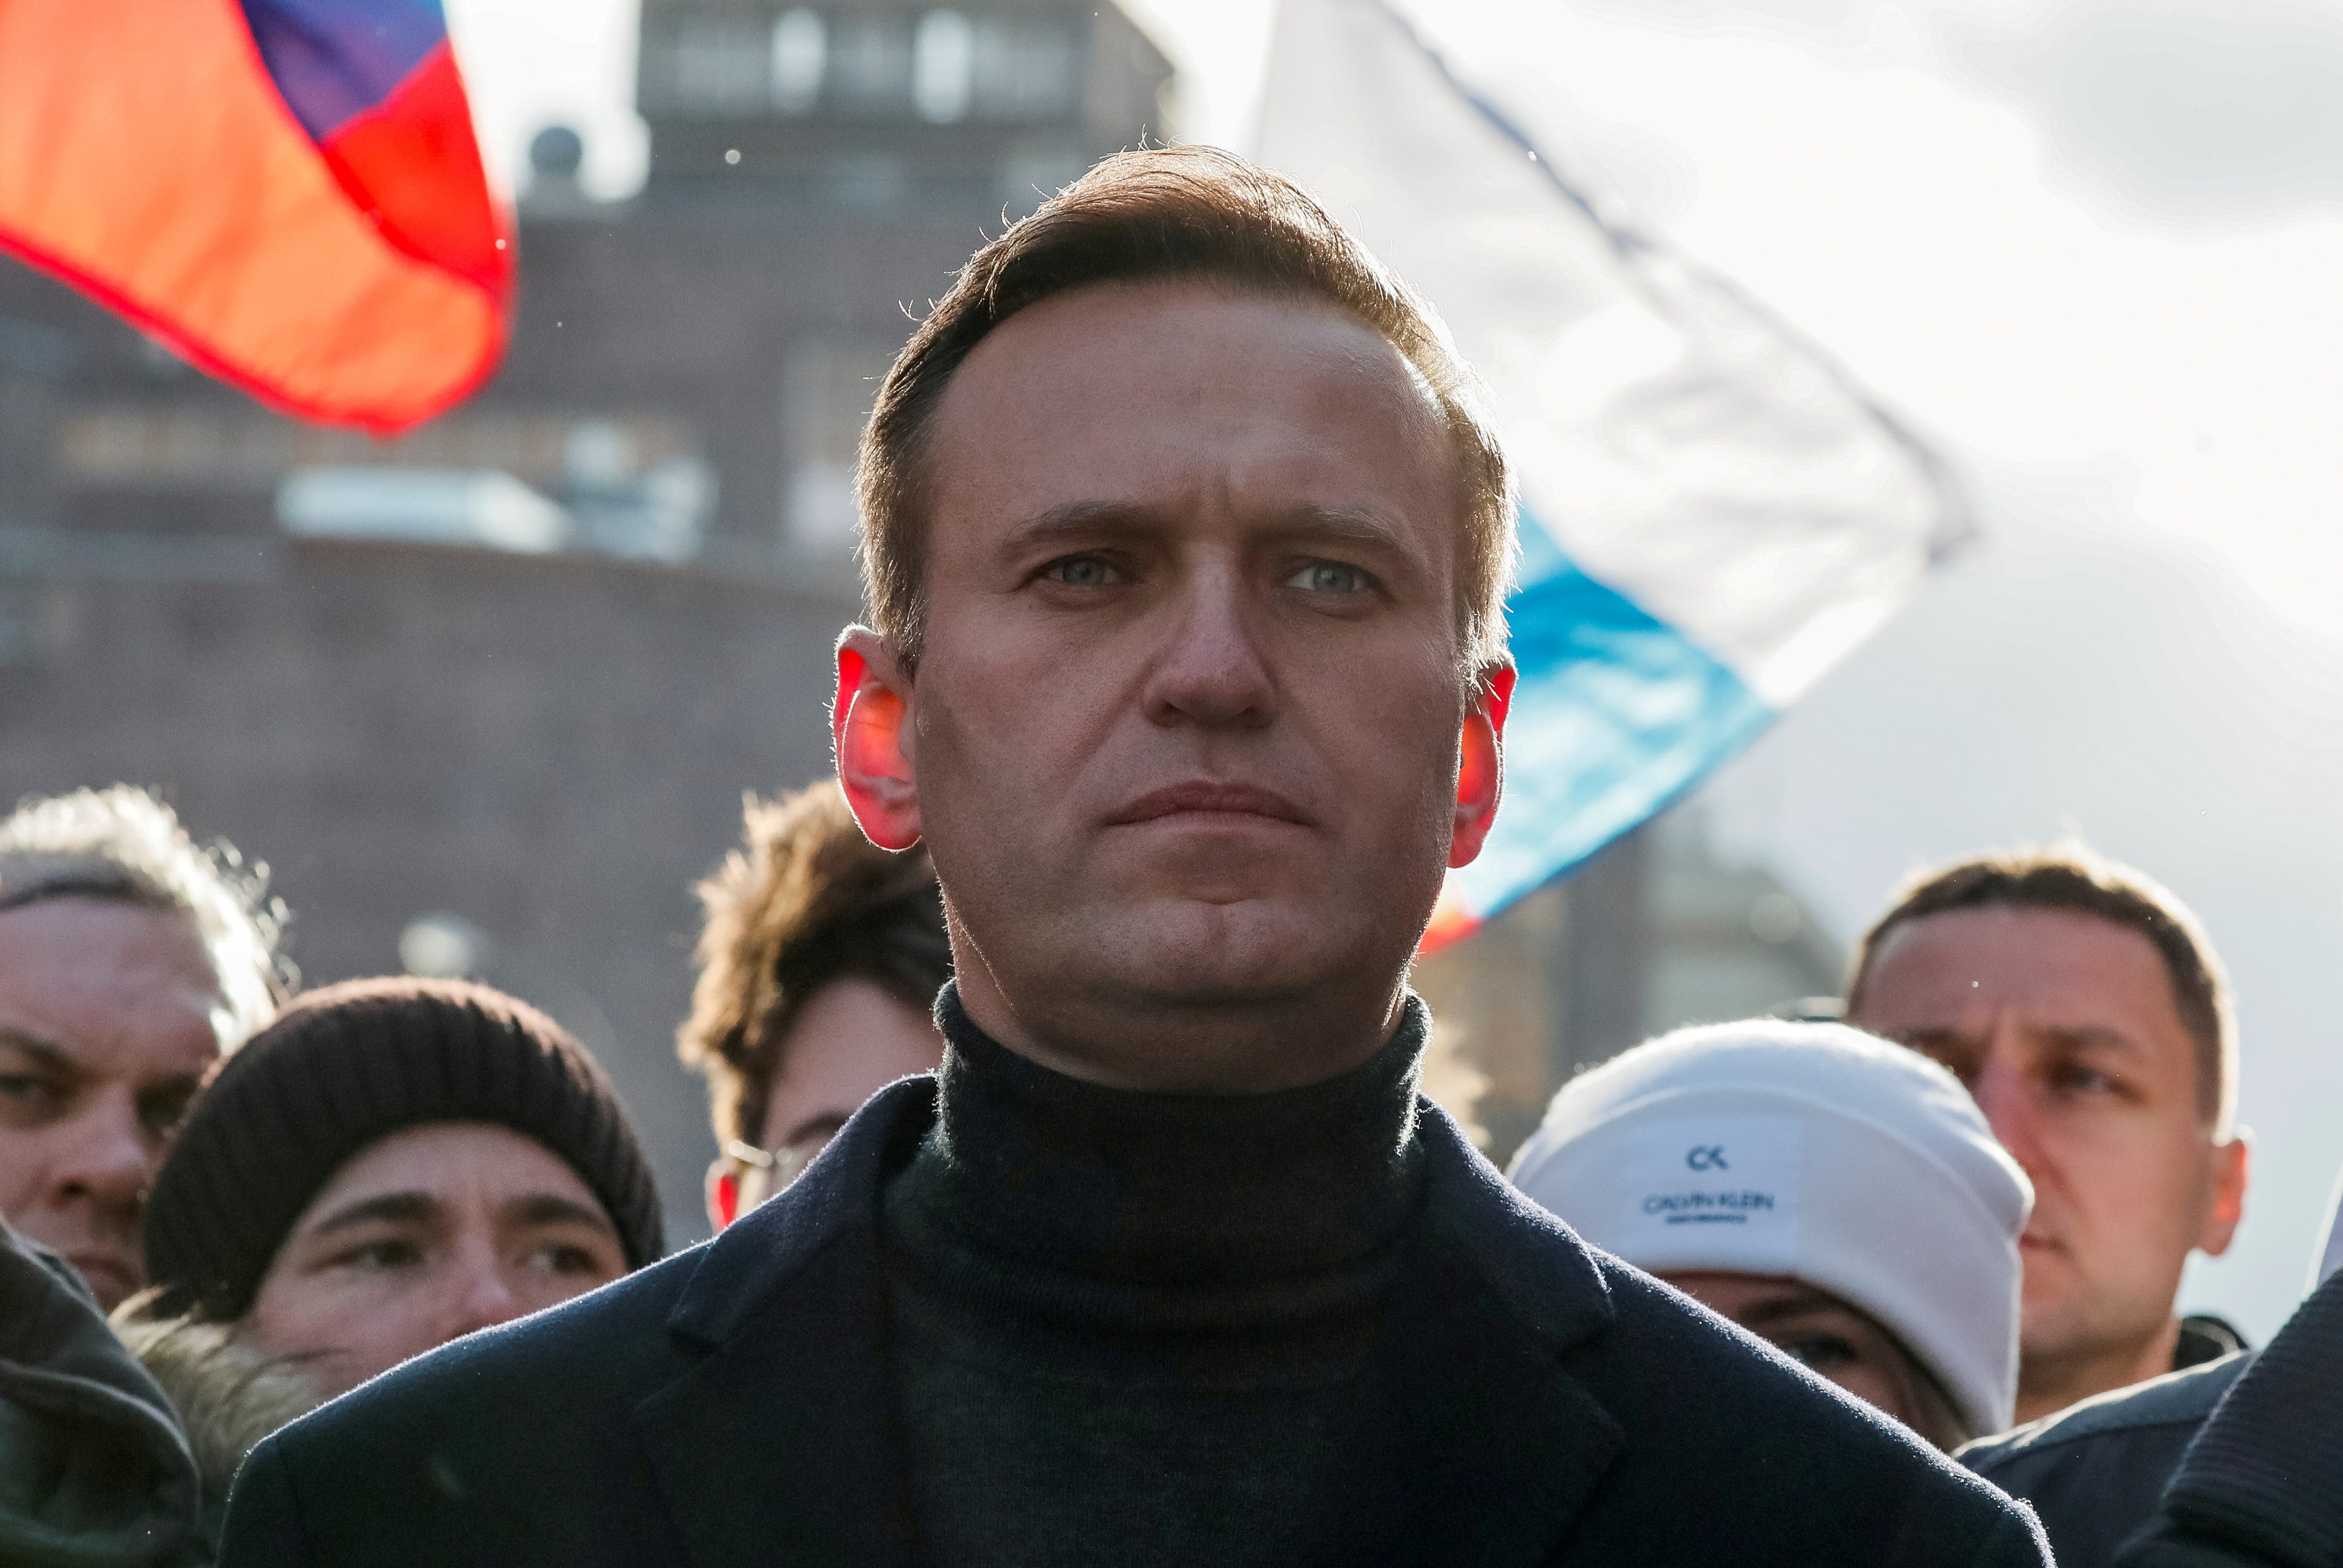 Western countries call on Russia at UN rights body to release Navalny